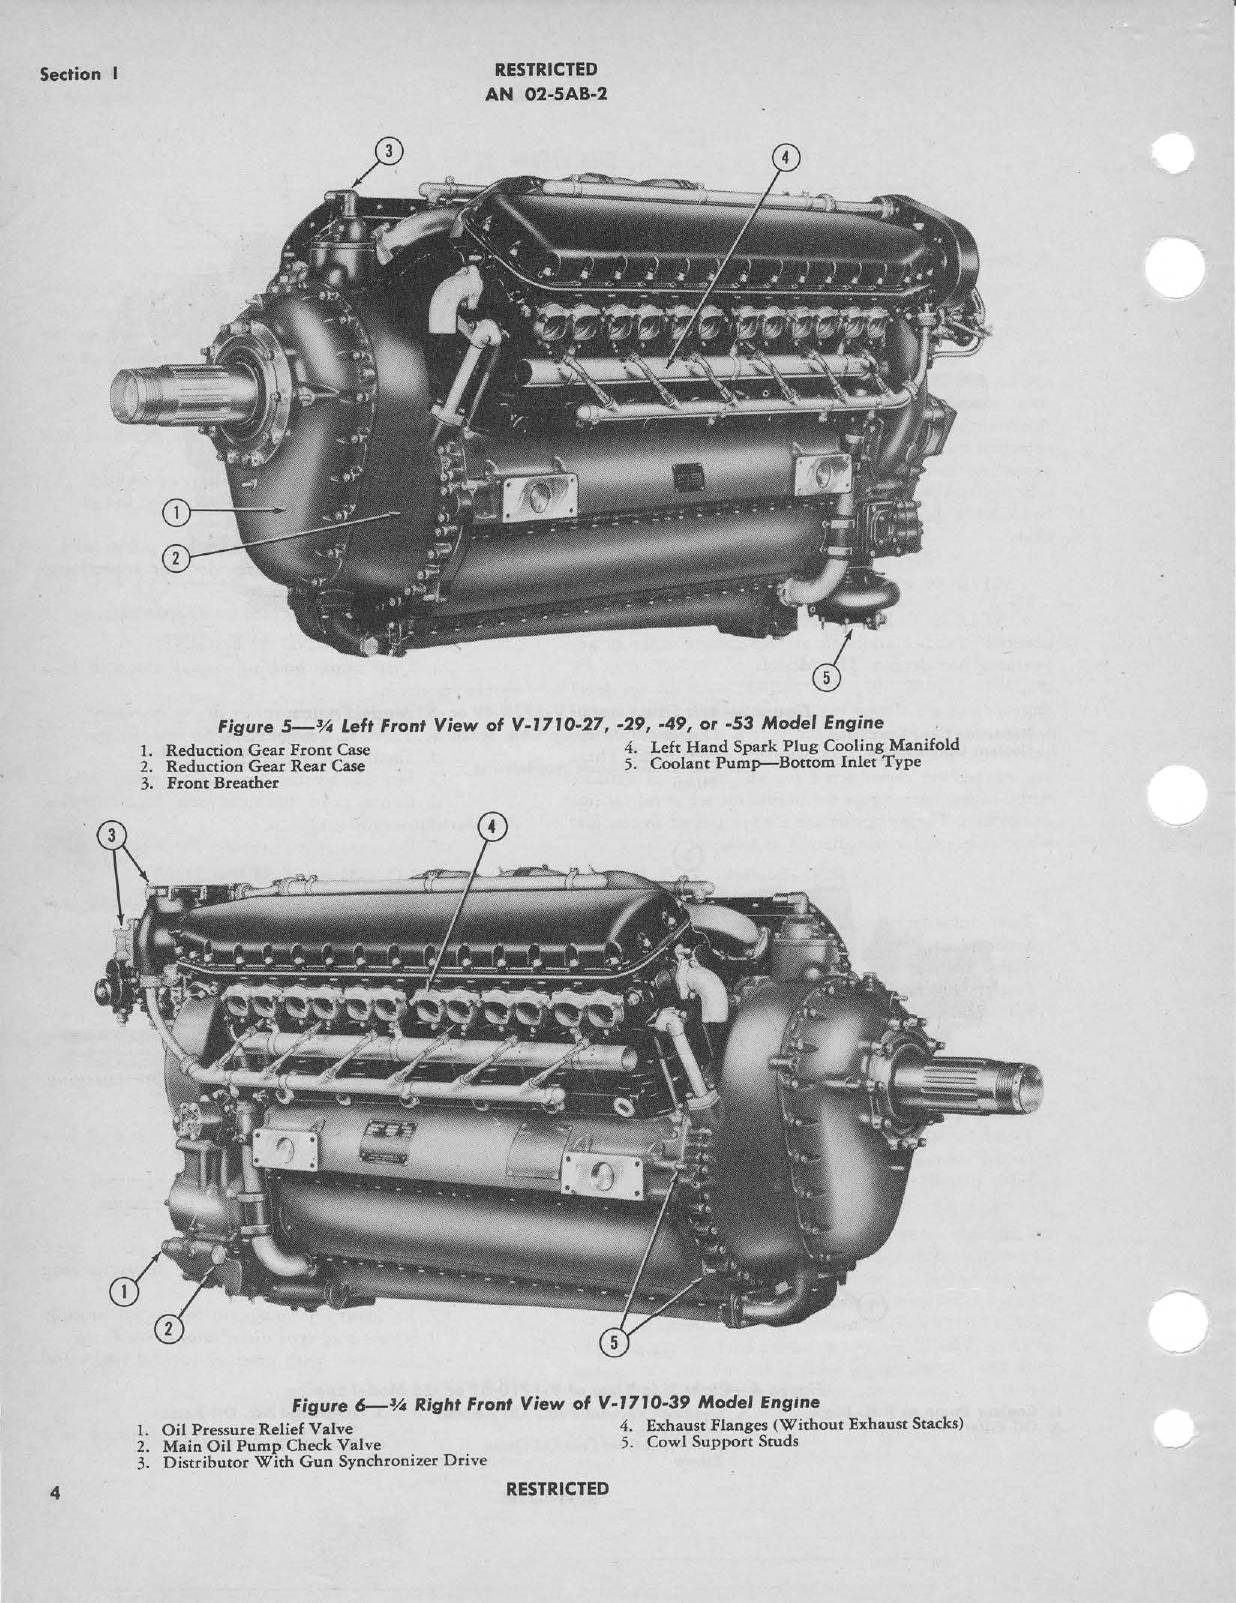 Sample page 8 from AirCorps Library document: Service Instructions for V-1710 Series Engines